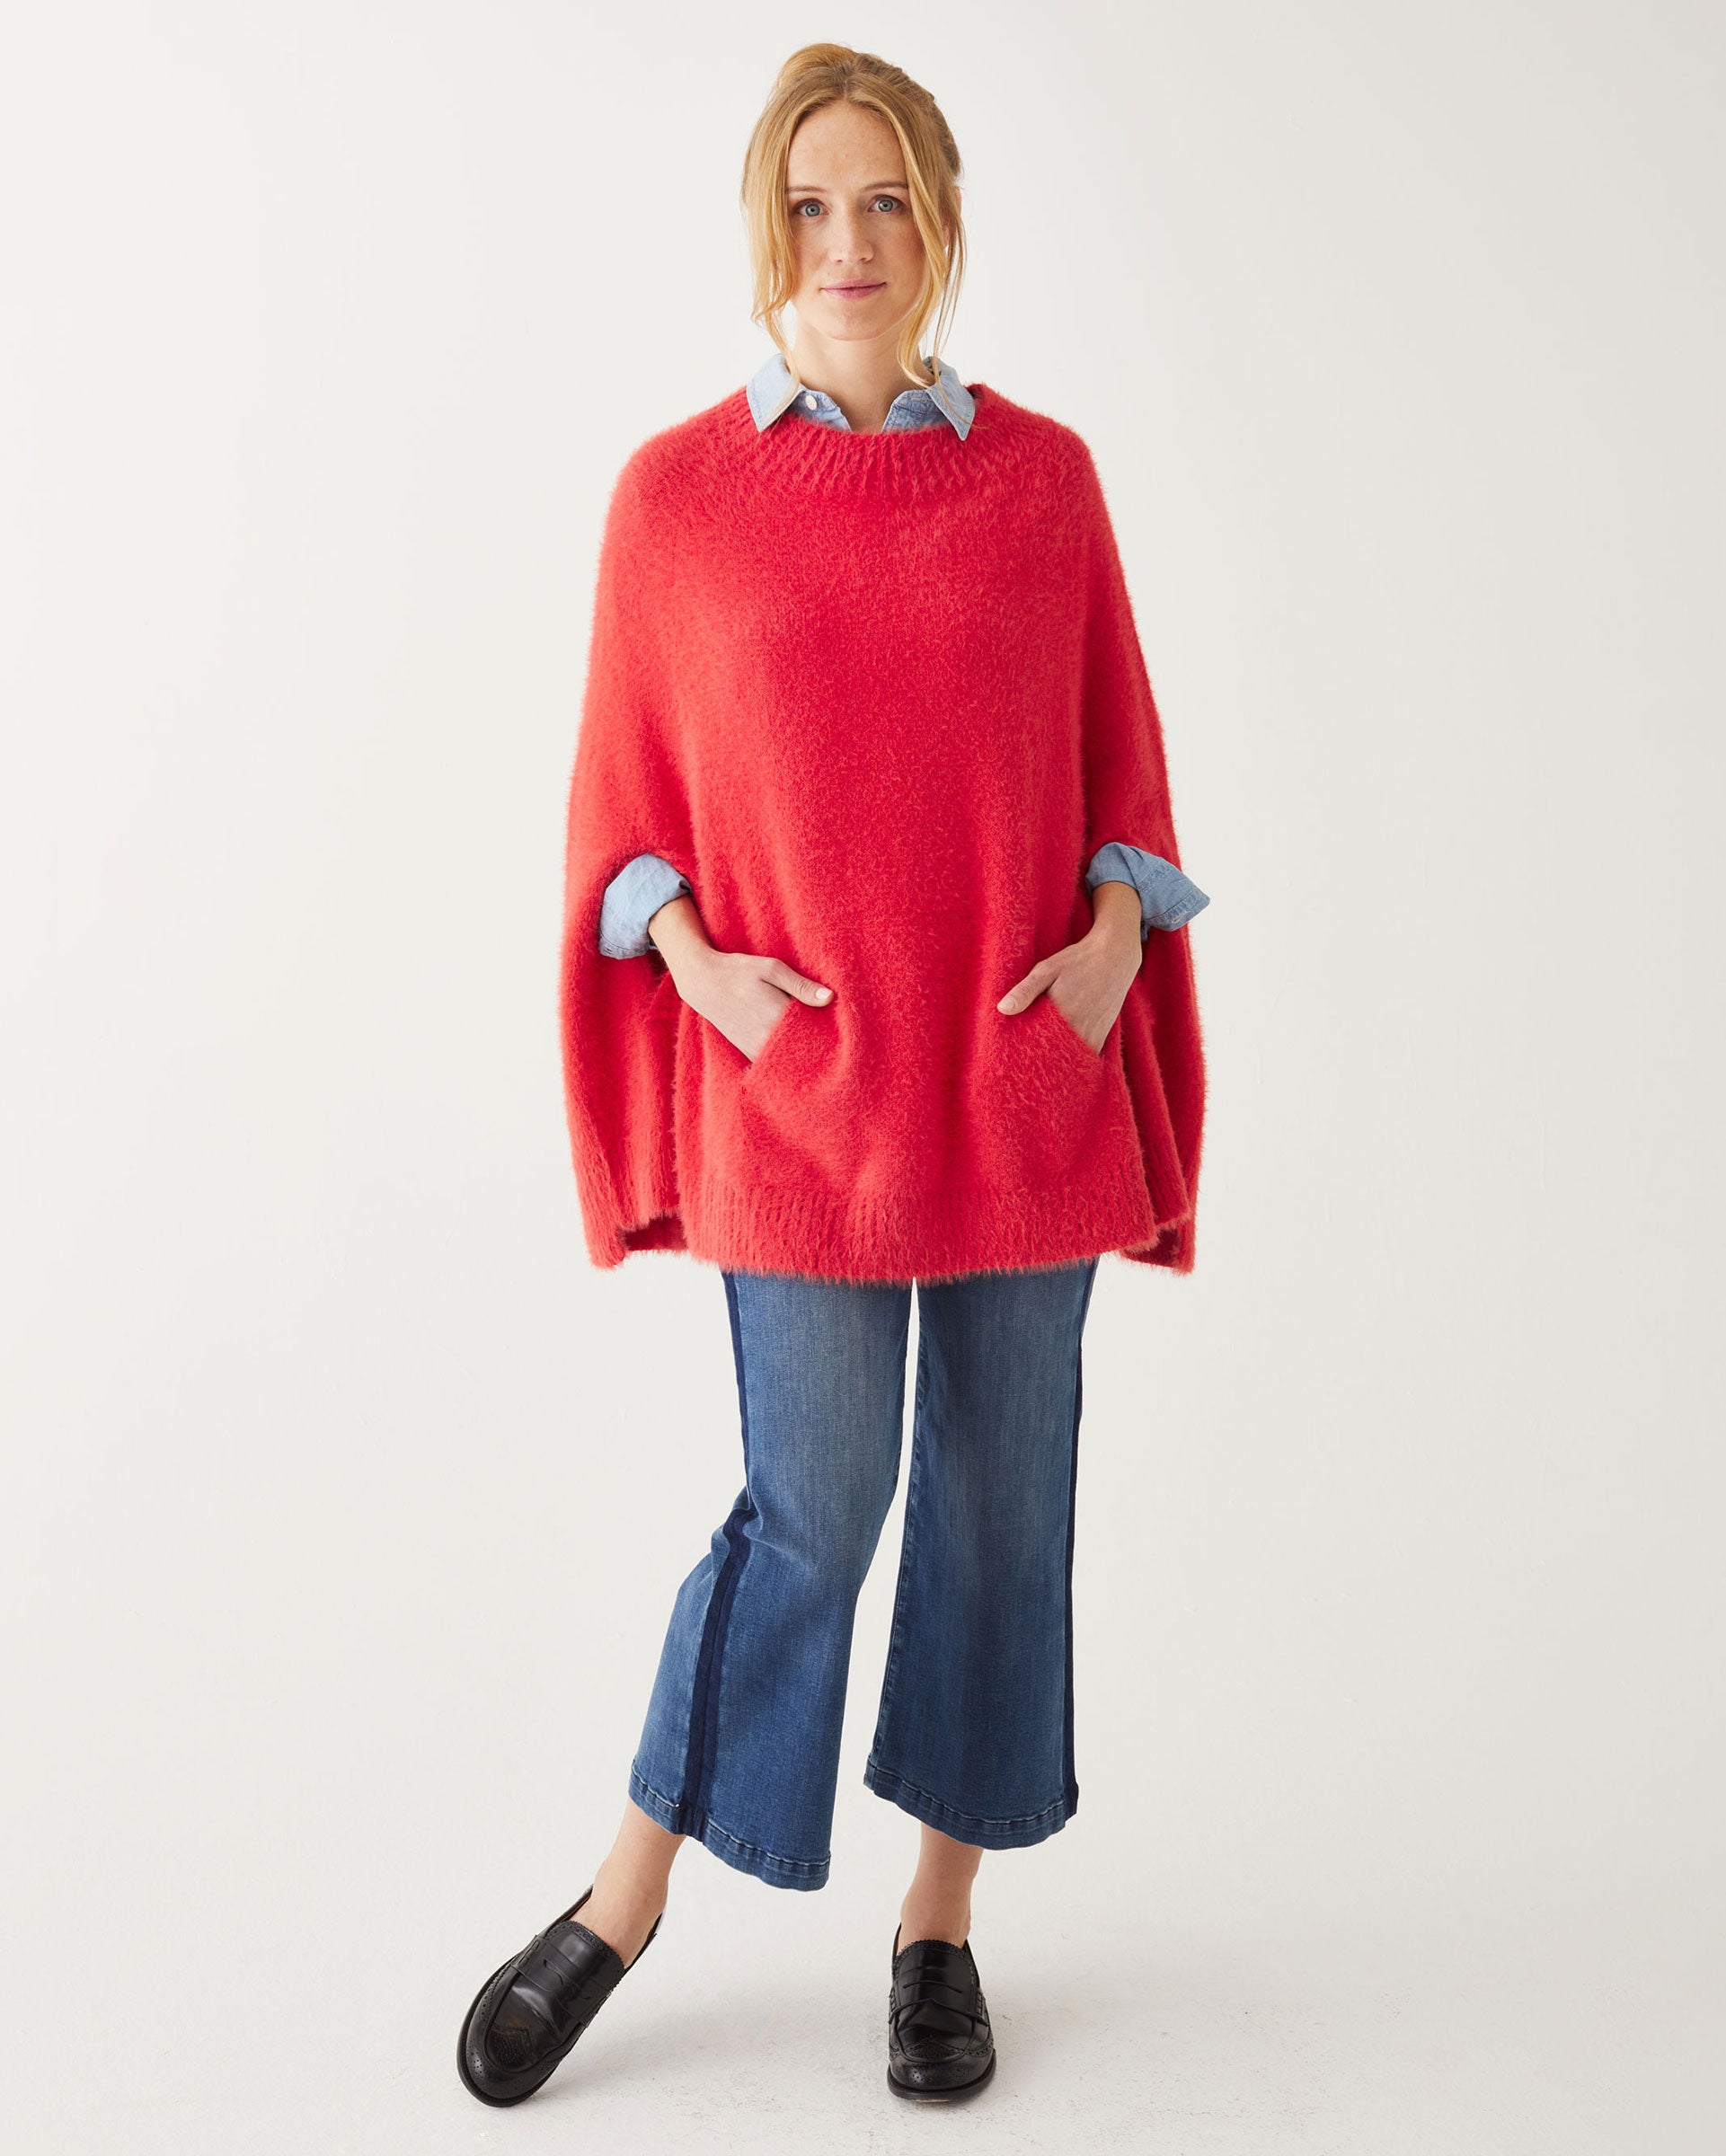 Female wearing a red poncho over blue jeans has her hands in pockets in front of white wall